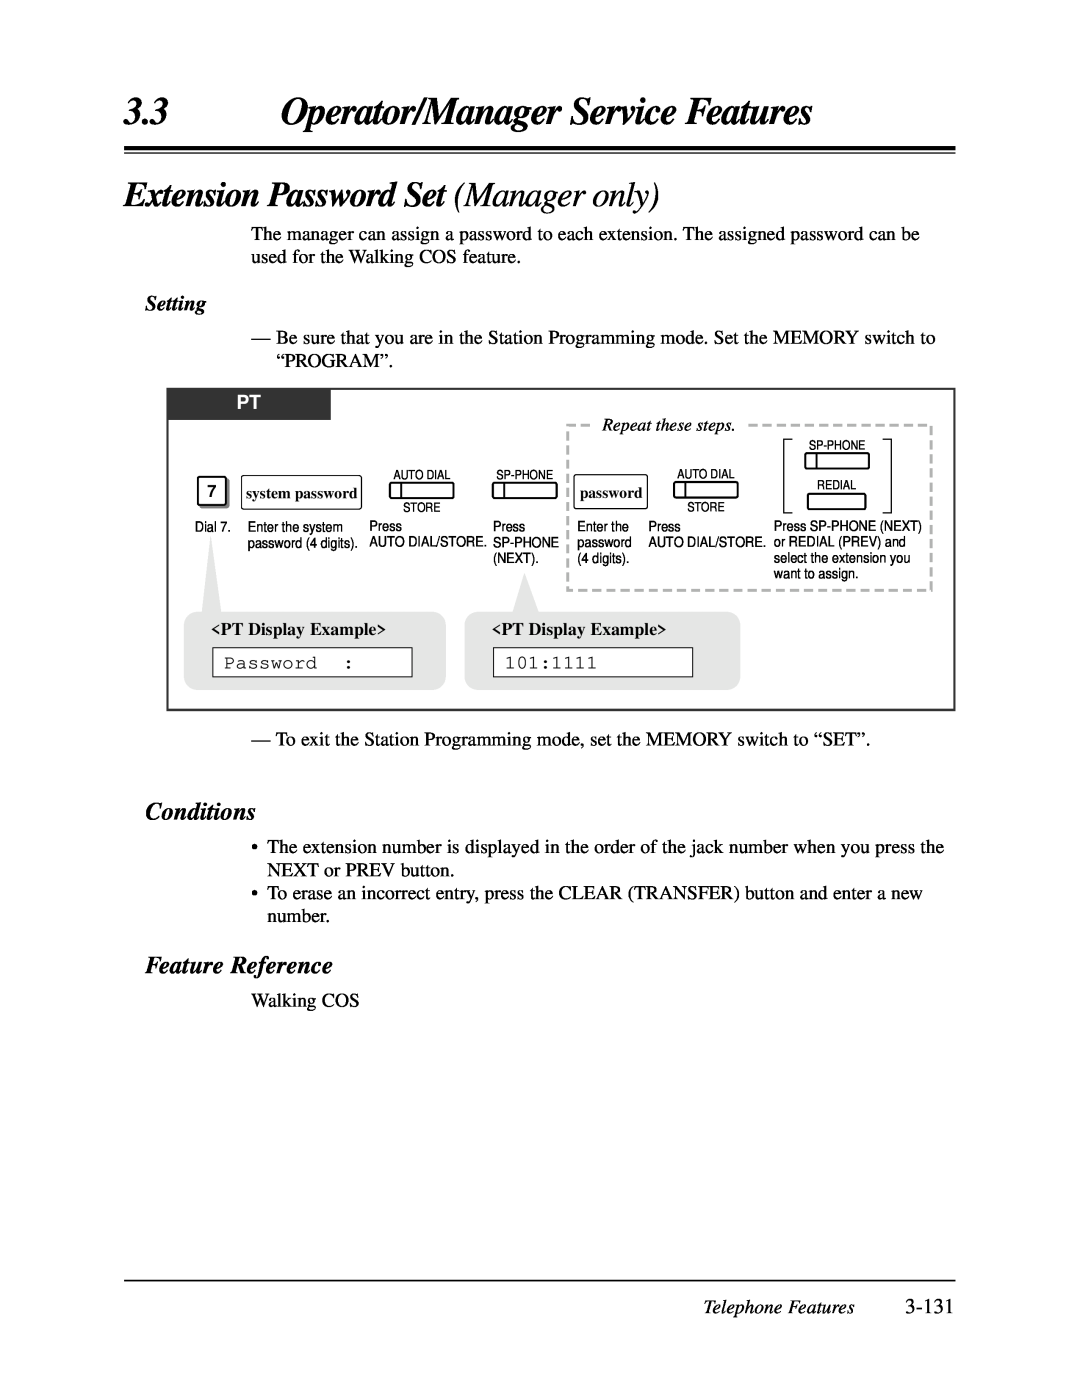 Panasonic KX-TA624 Extension Password Set Manager only, 3-131, Operator/Manager Service Features, Conditions, Setting 